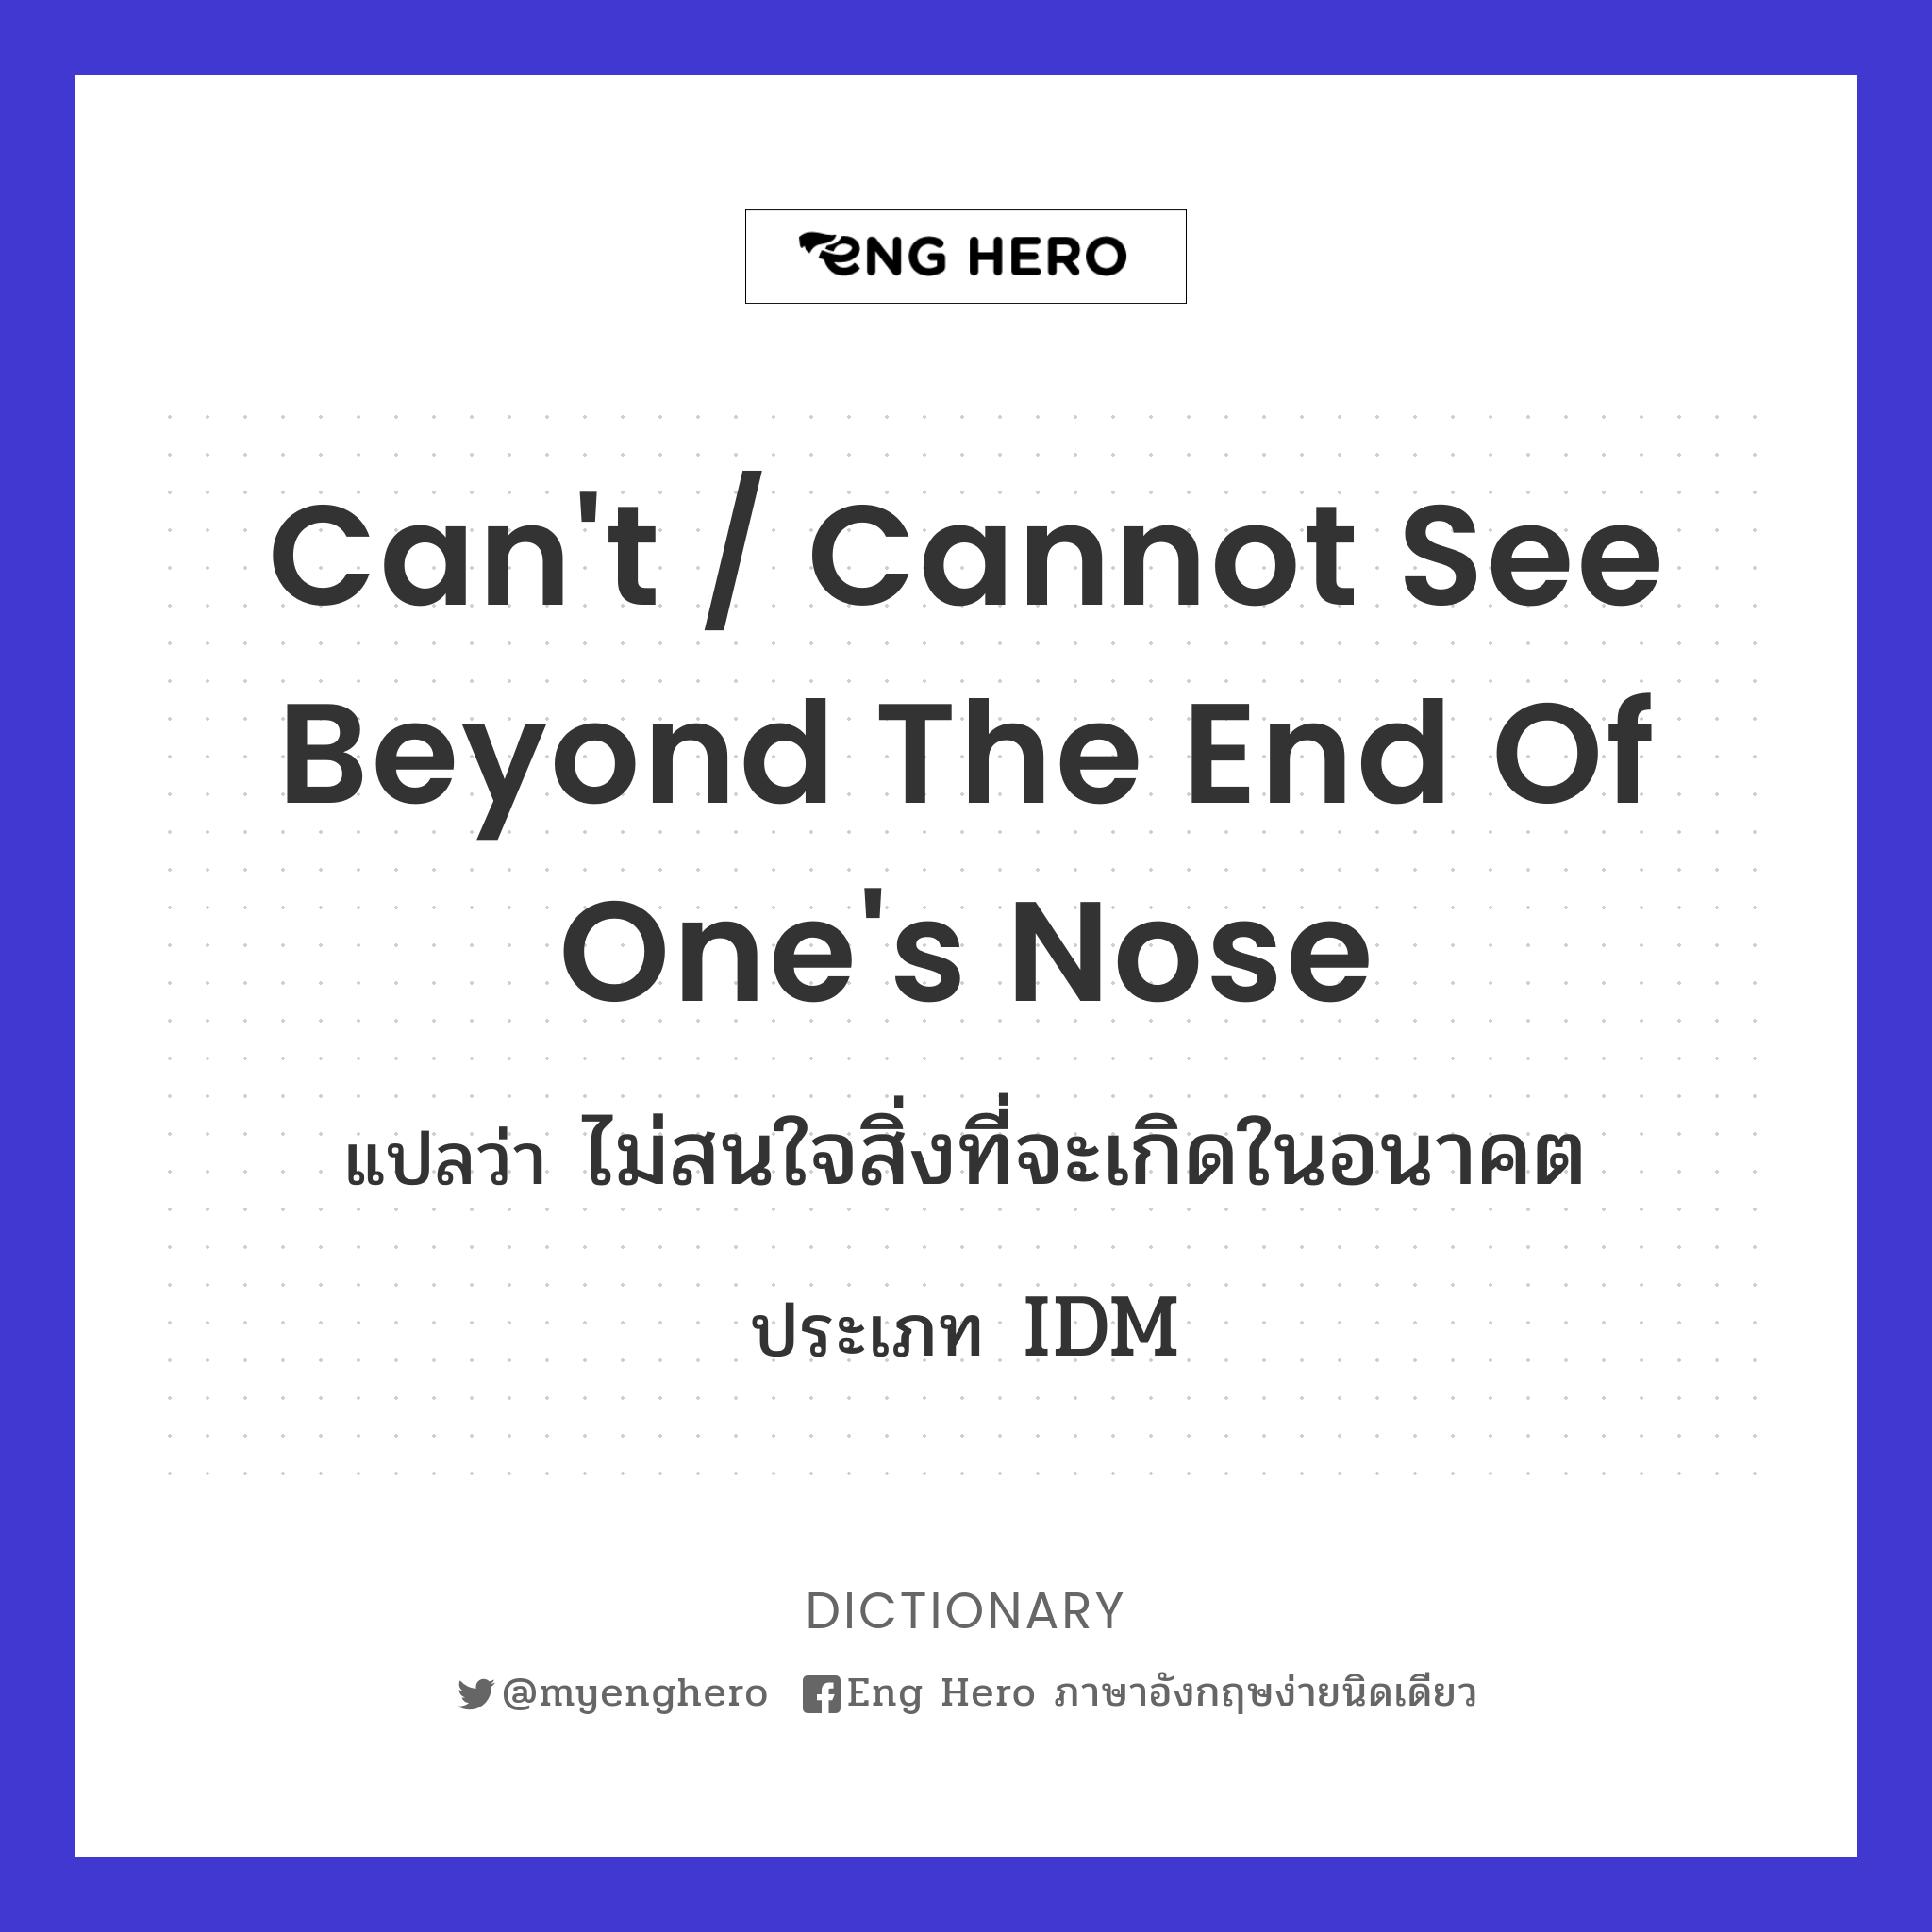 can't / cannot see beyond the end of one's nose